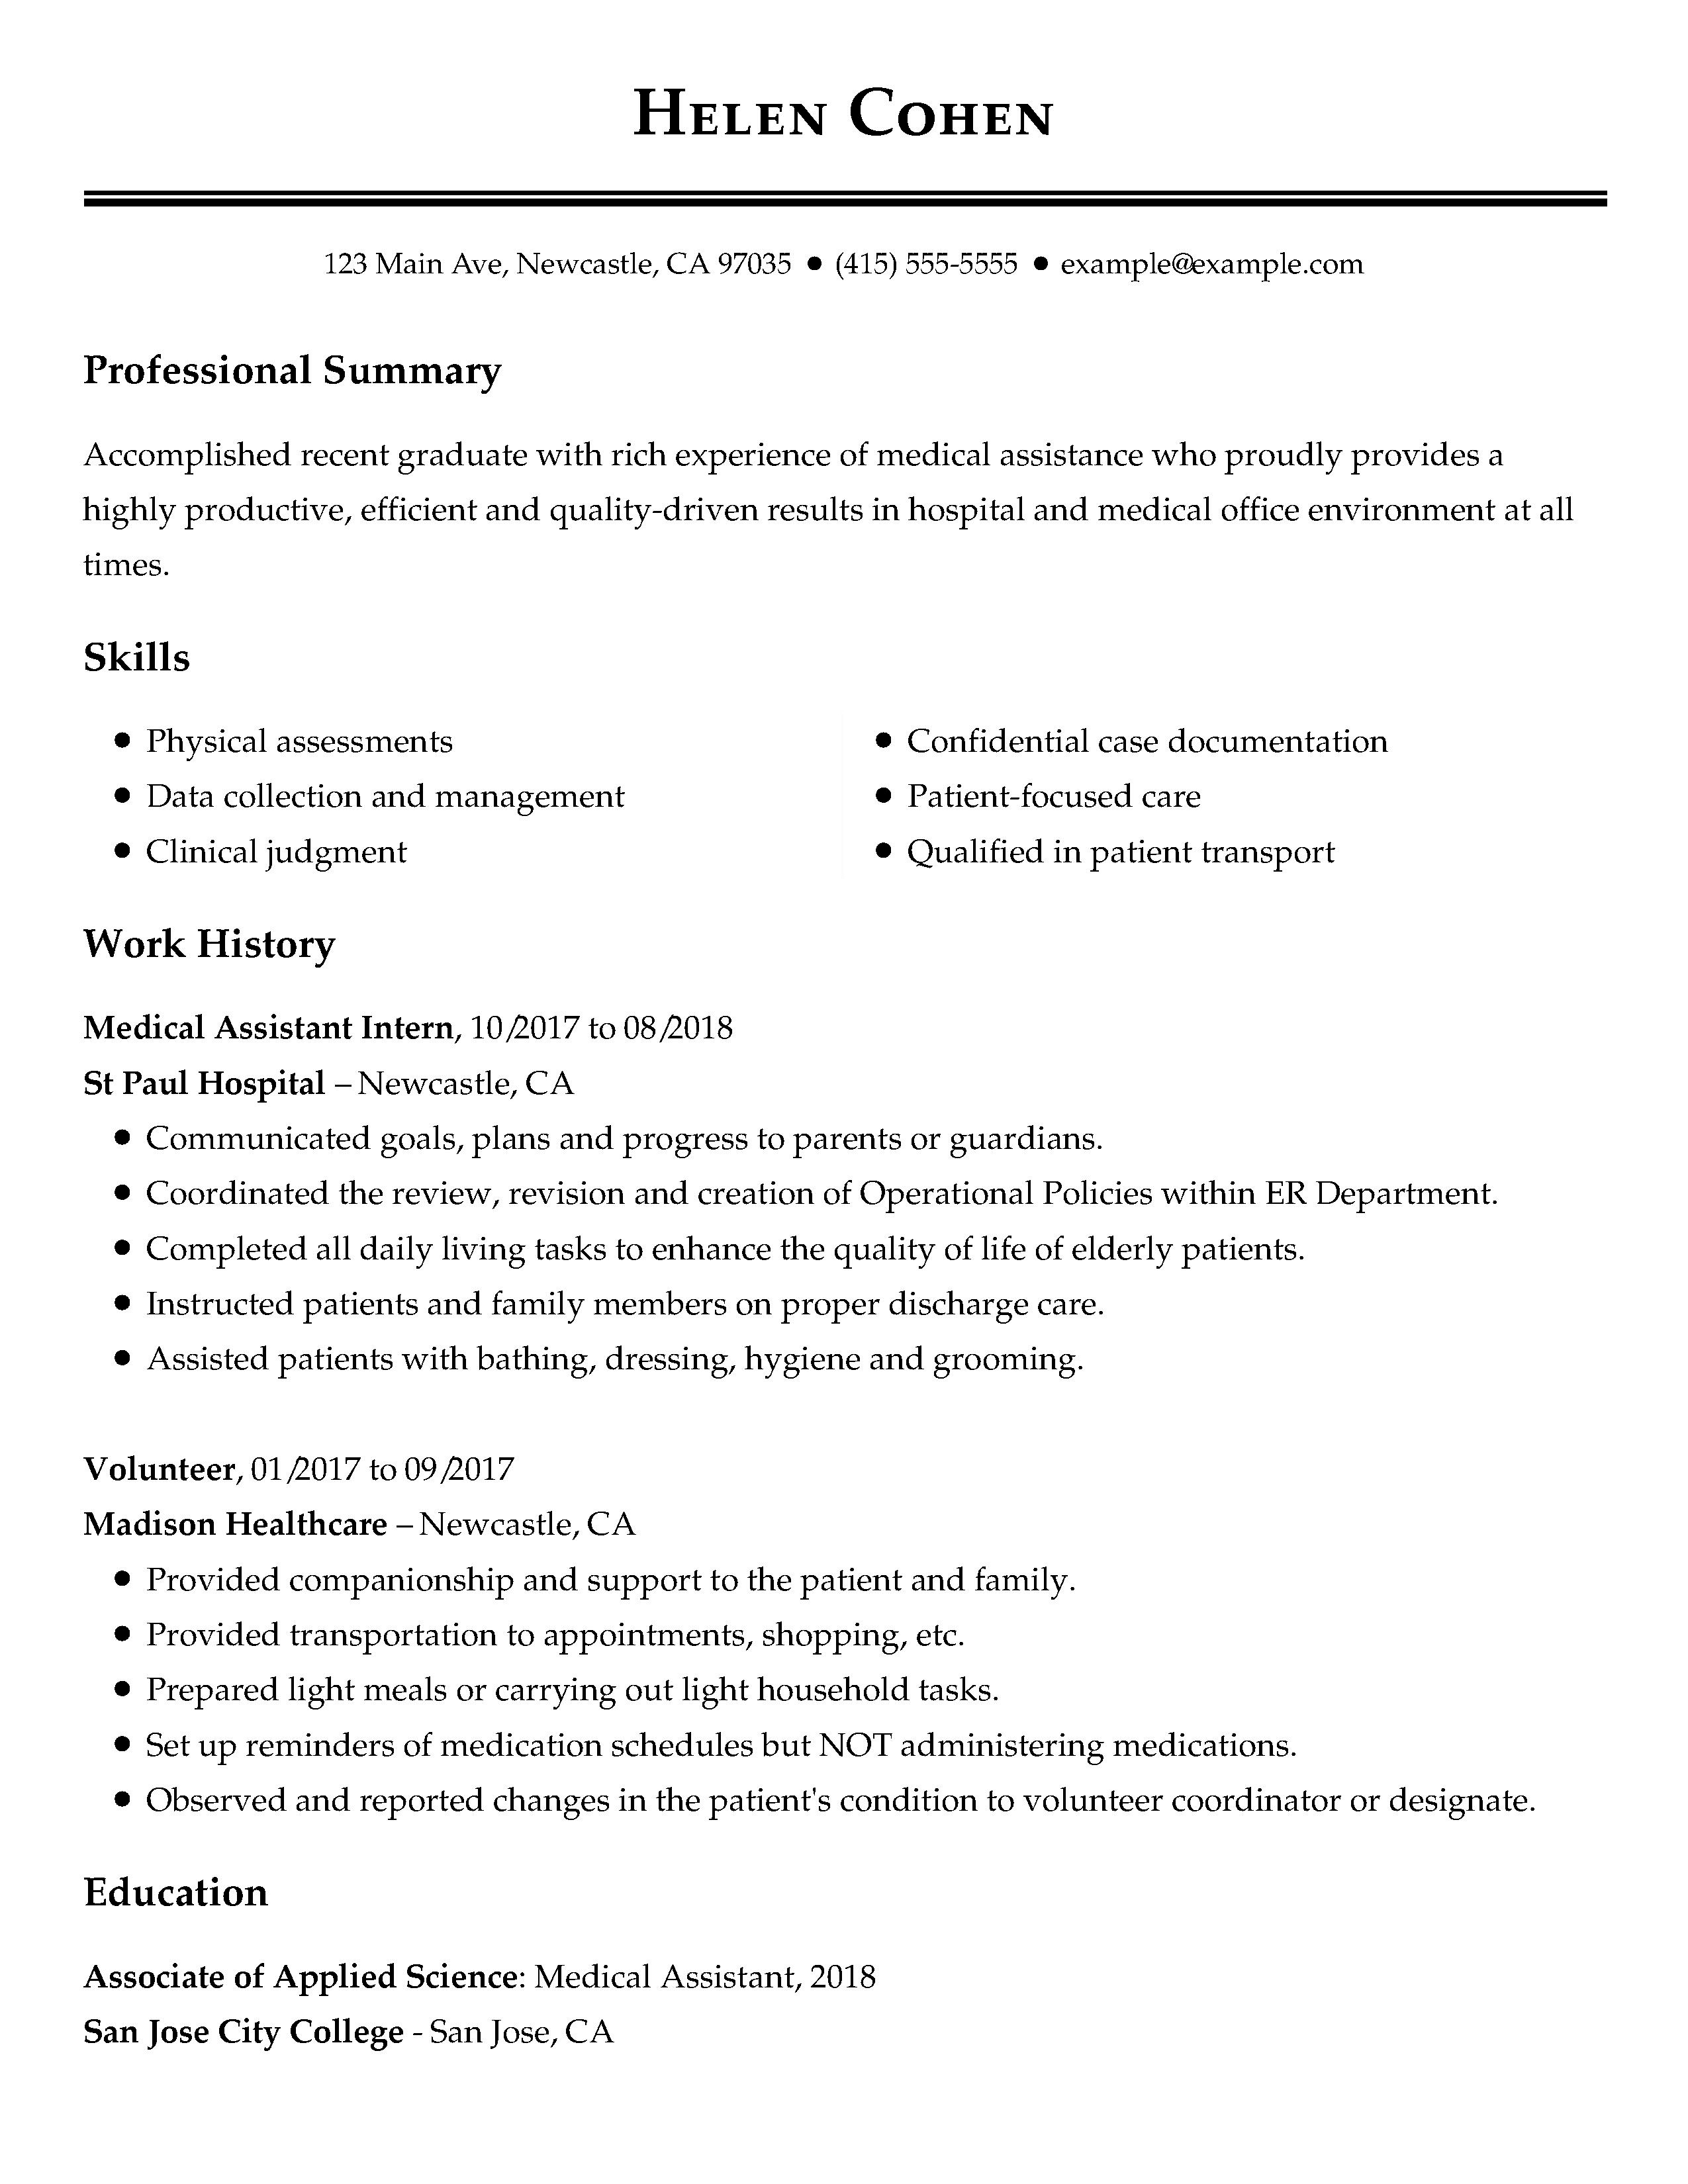 Good Resume Examples View 30 Samples Of Resumes Industry Experience Level